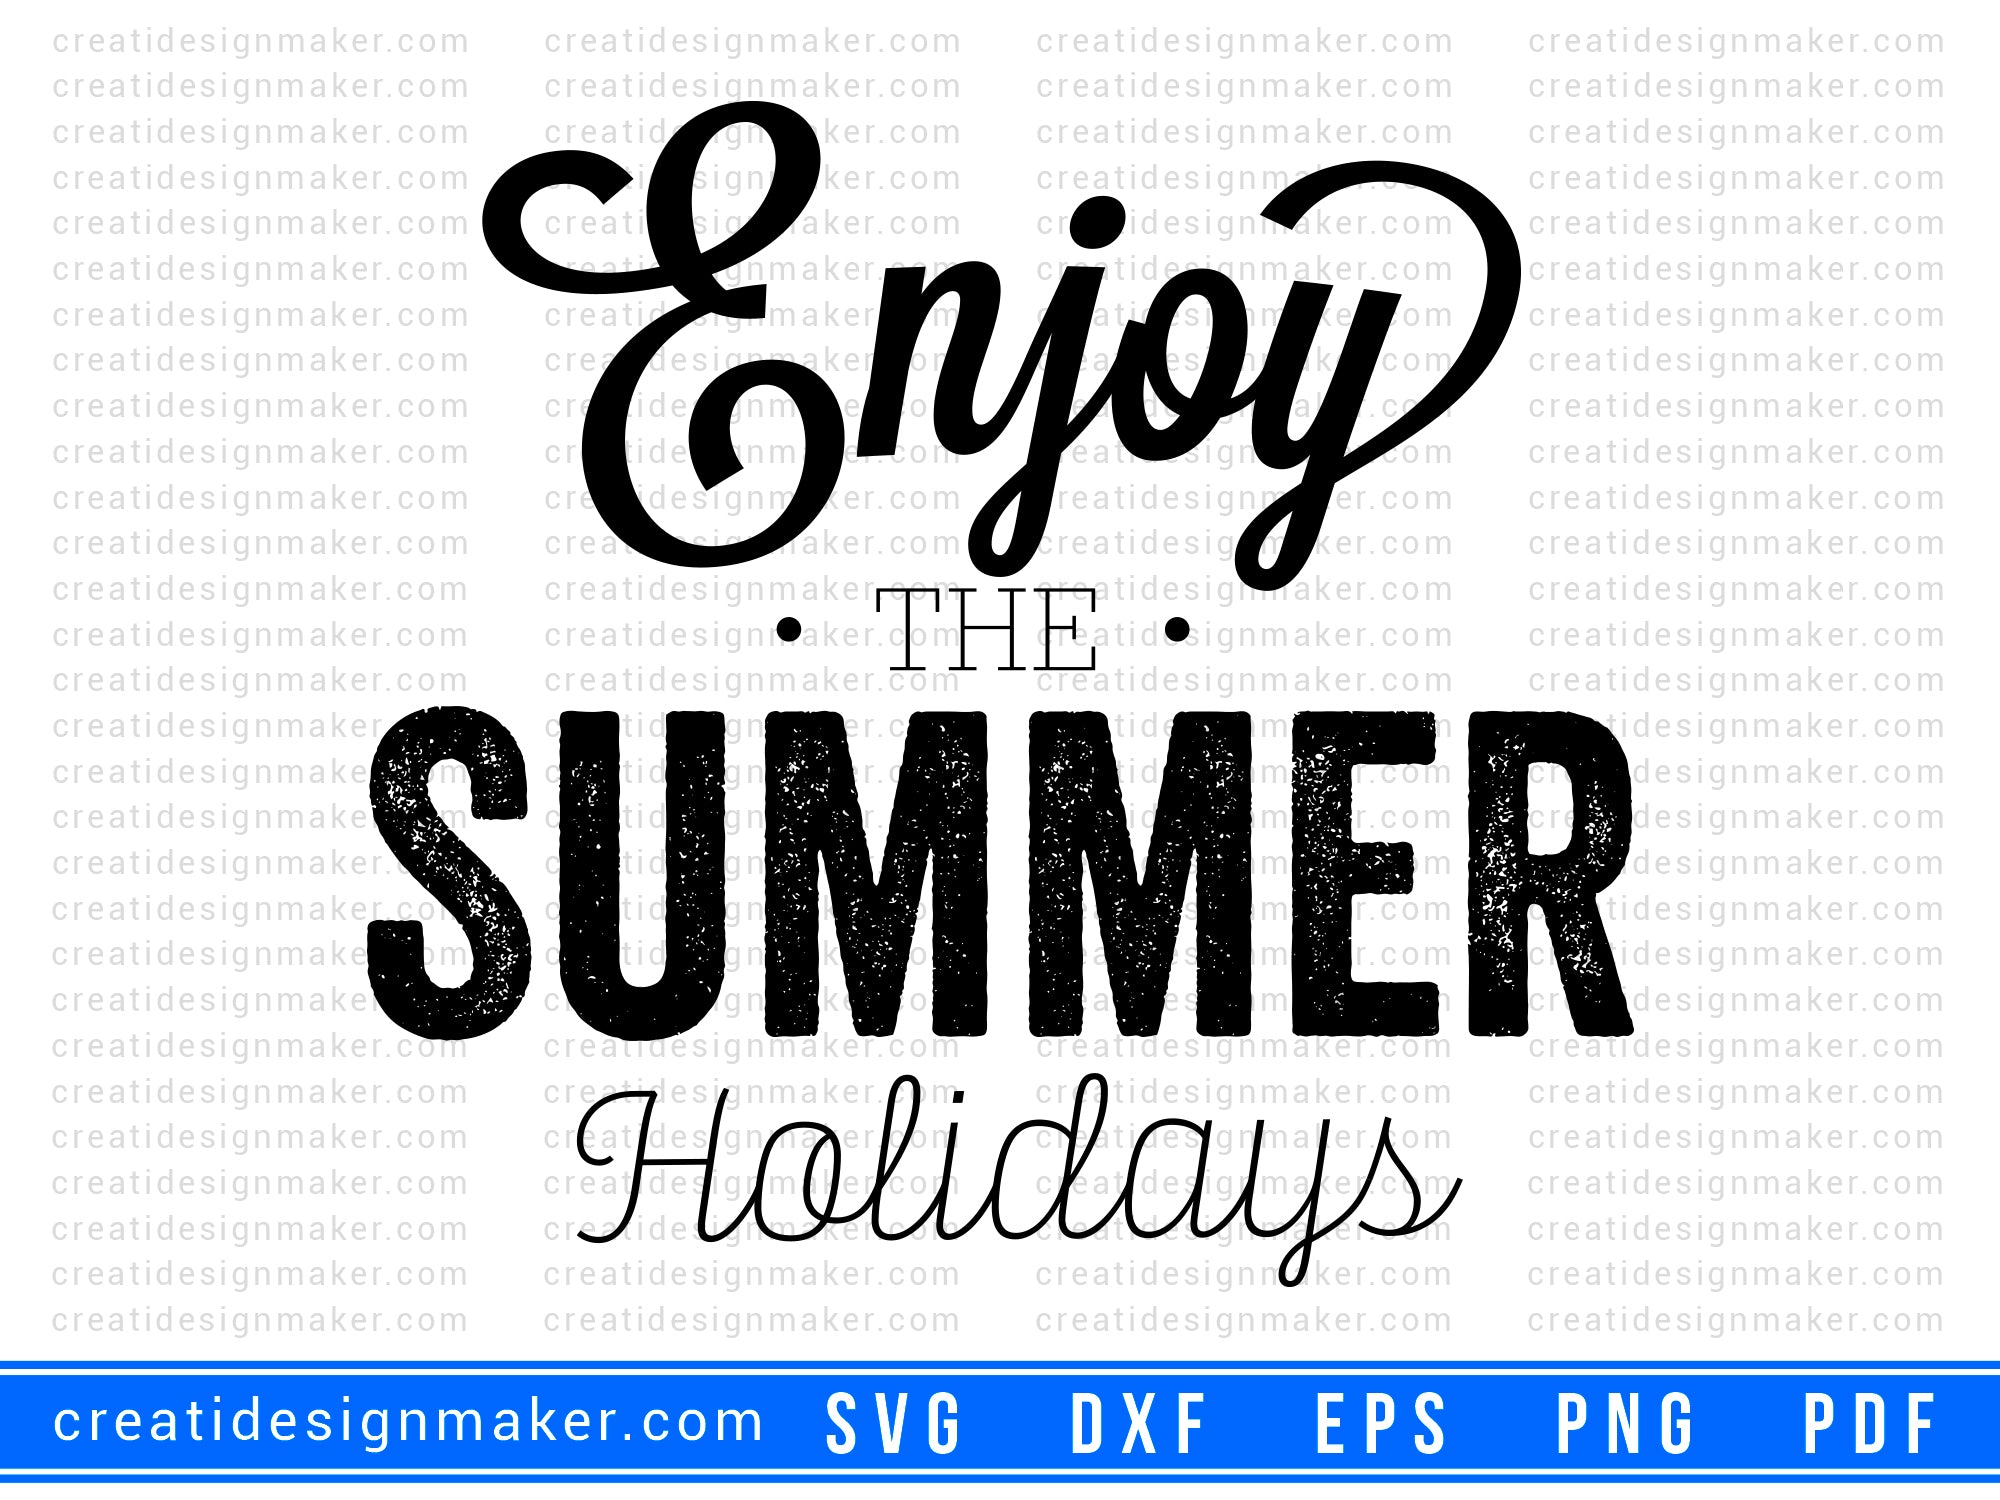 Enjoy the summer holidays Cut File For Cricut svg, dxf, png, eps, pdf Silhouette Printable Files